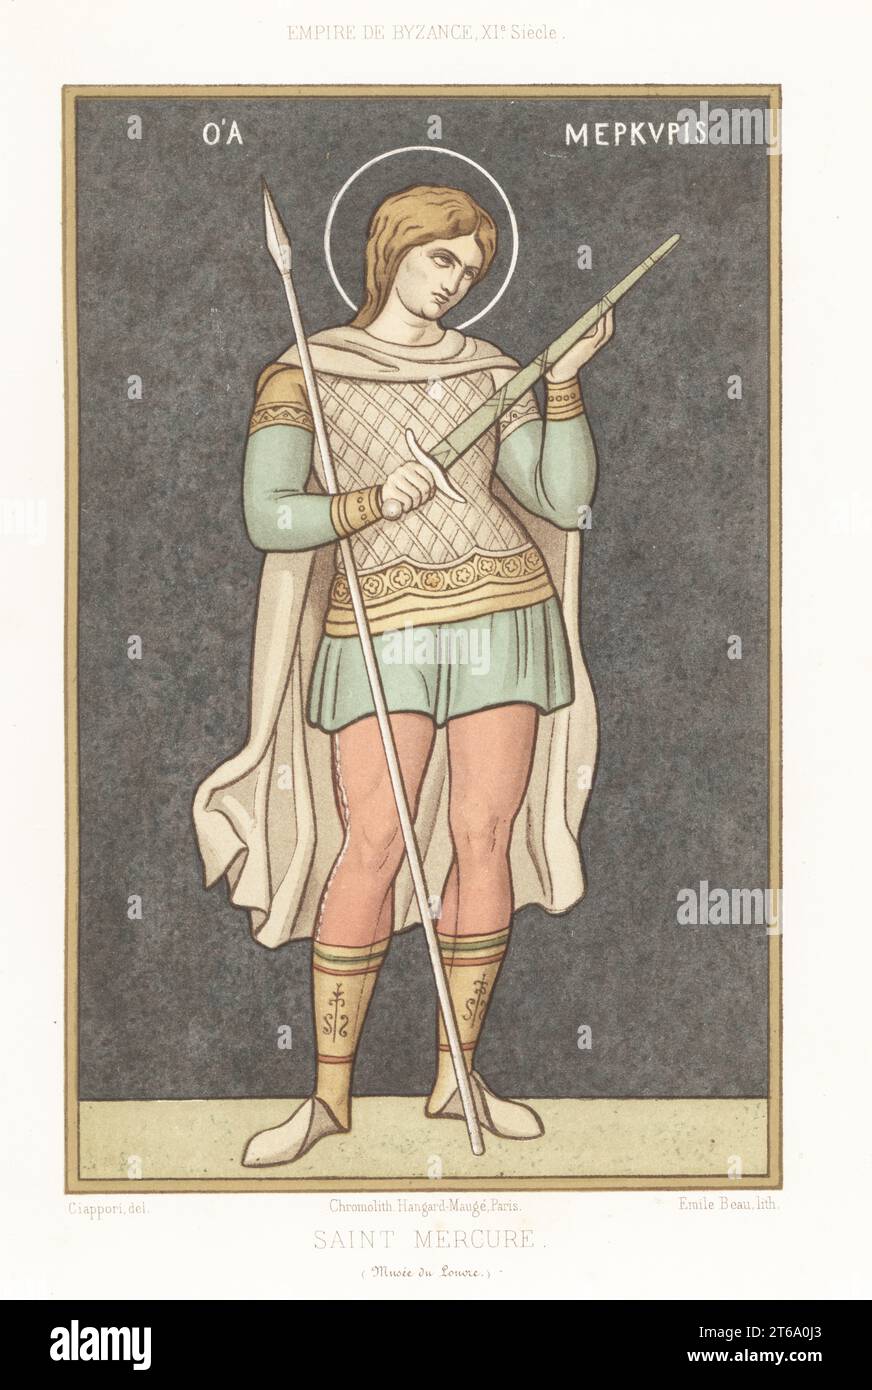 Saint Mercurius, Greek soldier and Christian martyr, 224-250. In Byzantine military costume of the 11th century. From a painting by Dominique Papety made in the Agia Lavra Monastery, Mt. Athos, now in the Louvre. Saint Mercure, Empire de Byzance, XIe siecle. Chromolithograph by Emile Beau after an illustration by Claudius Joseph Ciappori from Charles Louandres Les Arts Somptuaires, The Sumptuary Arts, Hangard-Mauge, Paris, 1858. Stock Photo